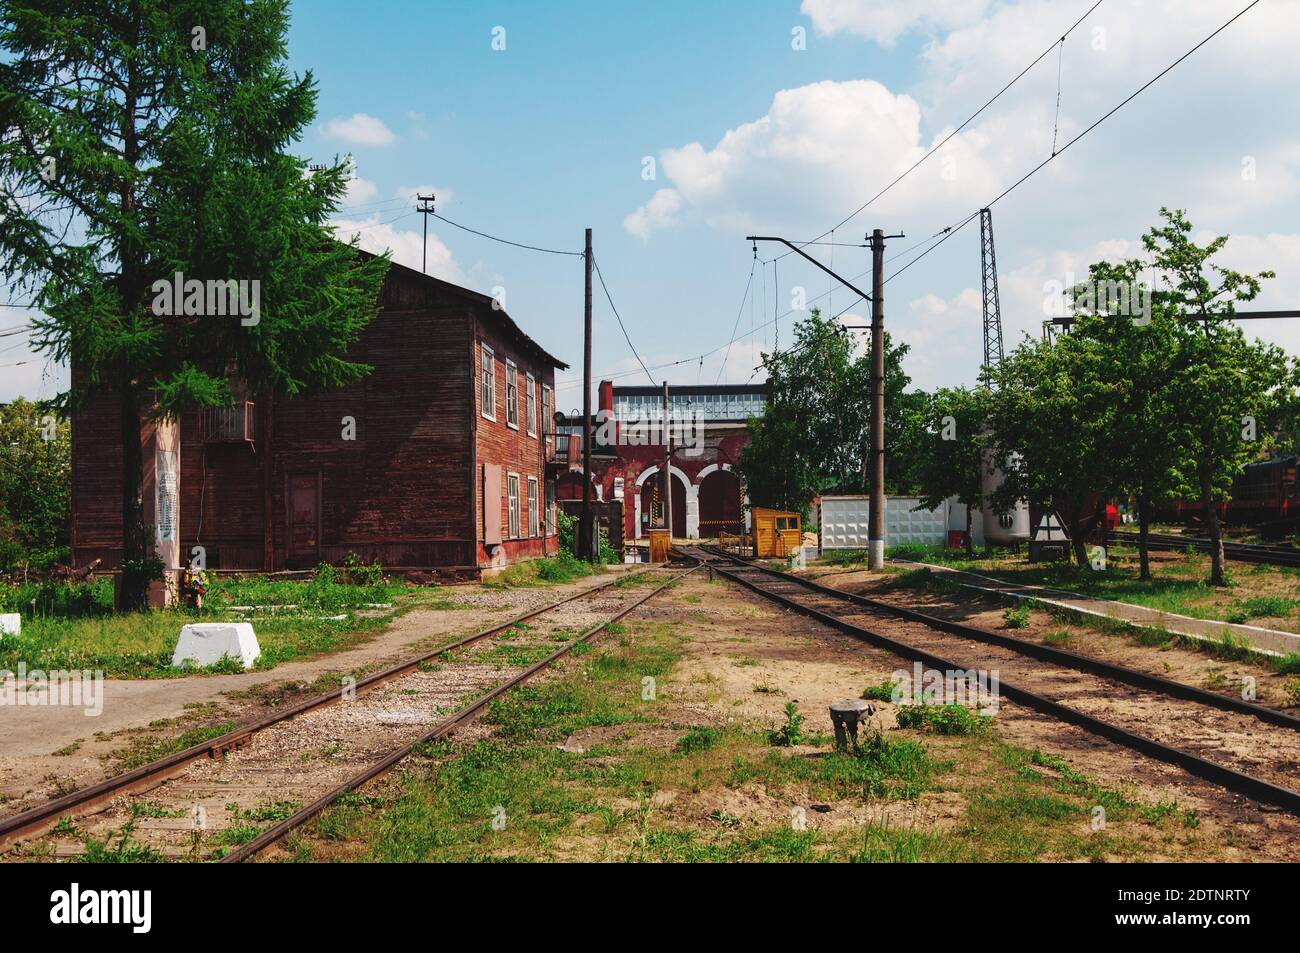 Railroad Tracks By Trees And Buildings Against Sky Stock Photo